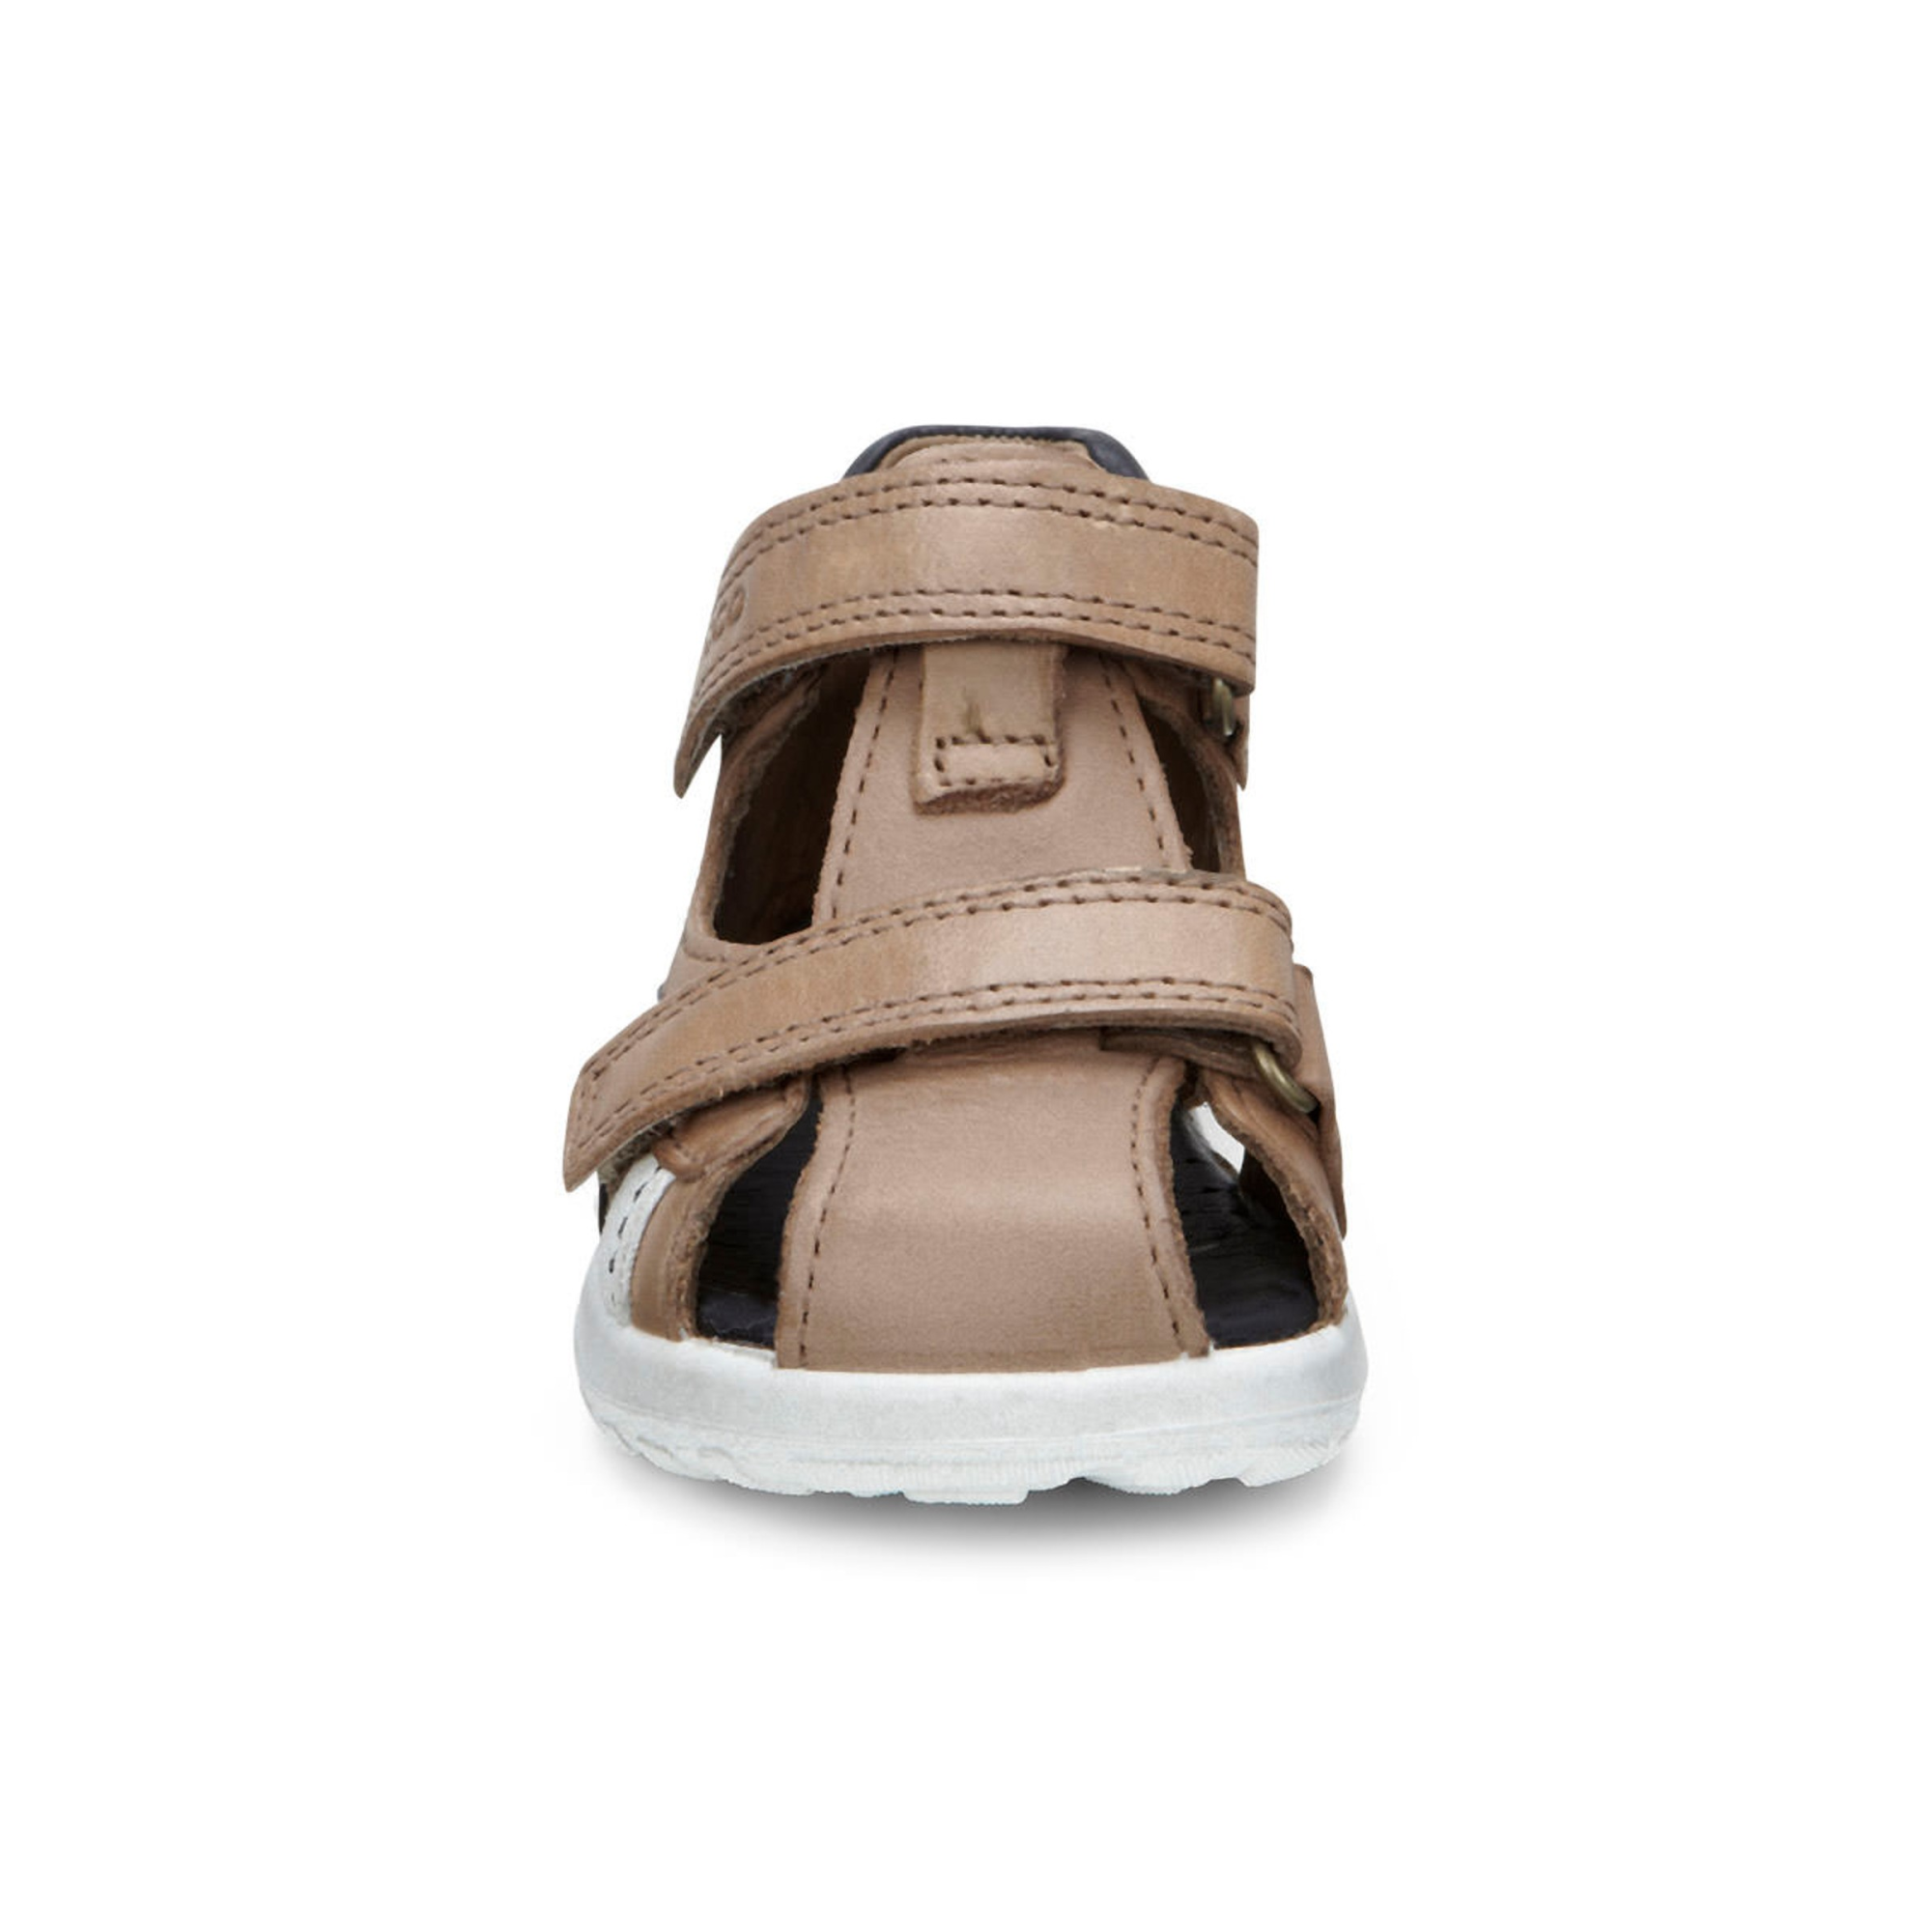 Ecco Sandal 24 - Products - Veryk Mall - Veryk Mall, product, quick safe your money!